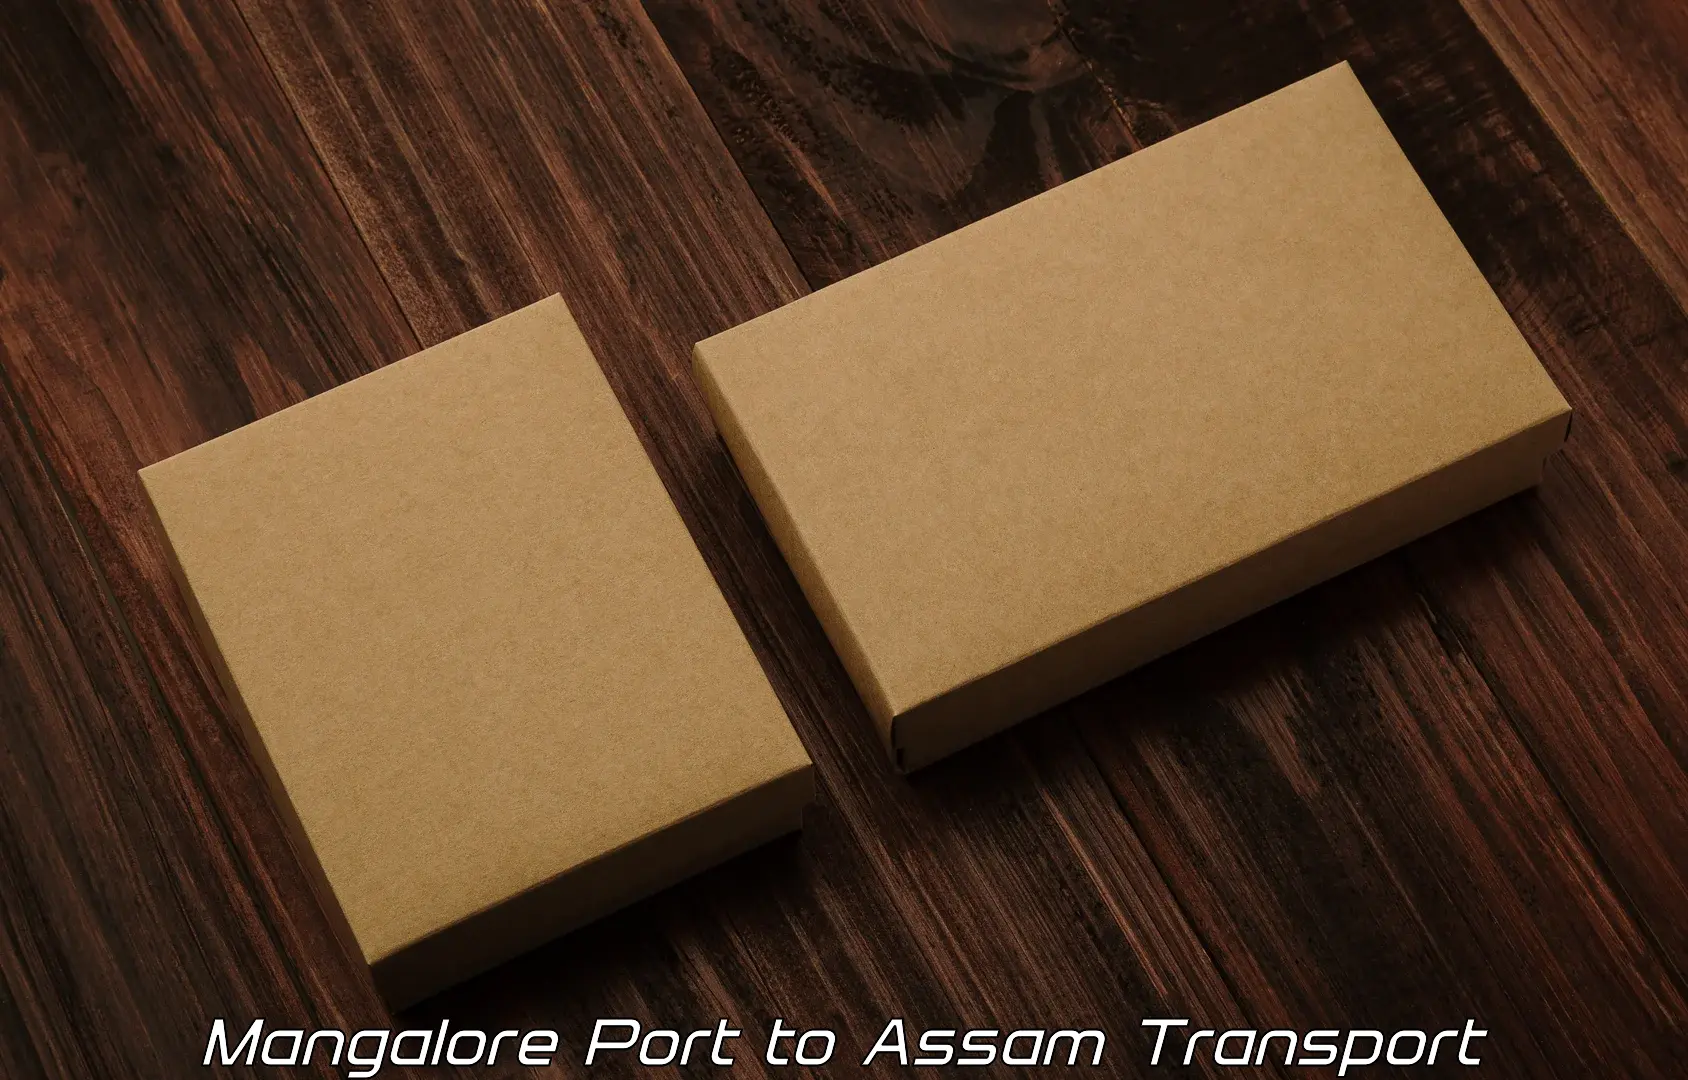 Land transport services in Mangalore Port to Thelamara